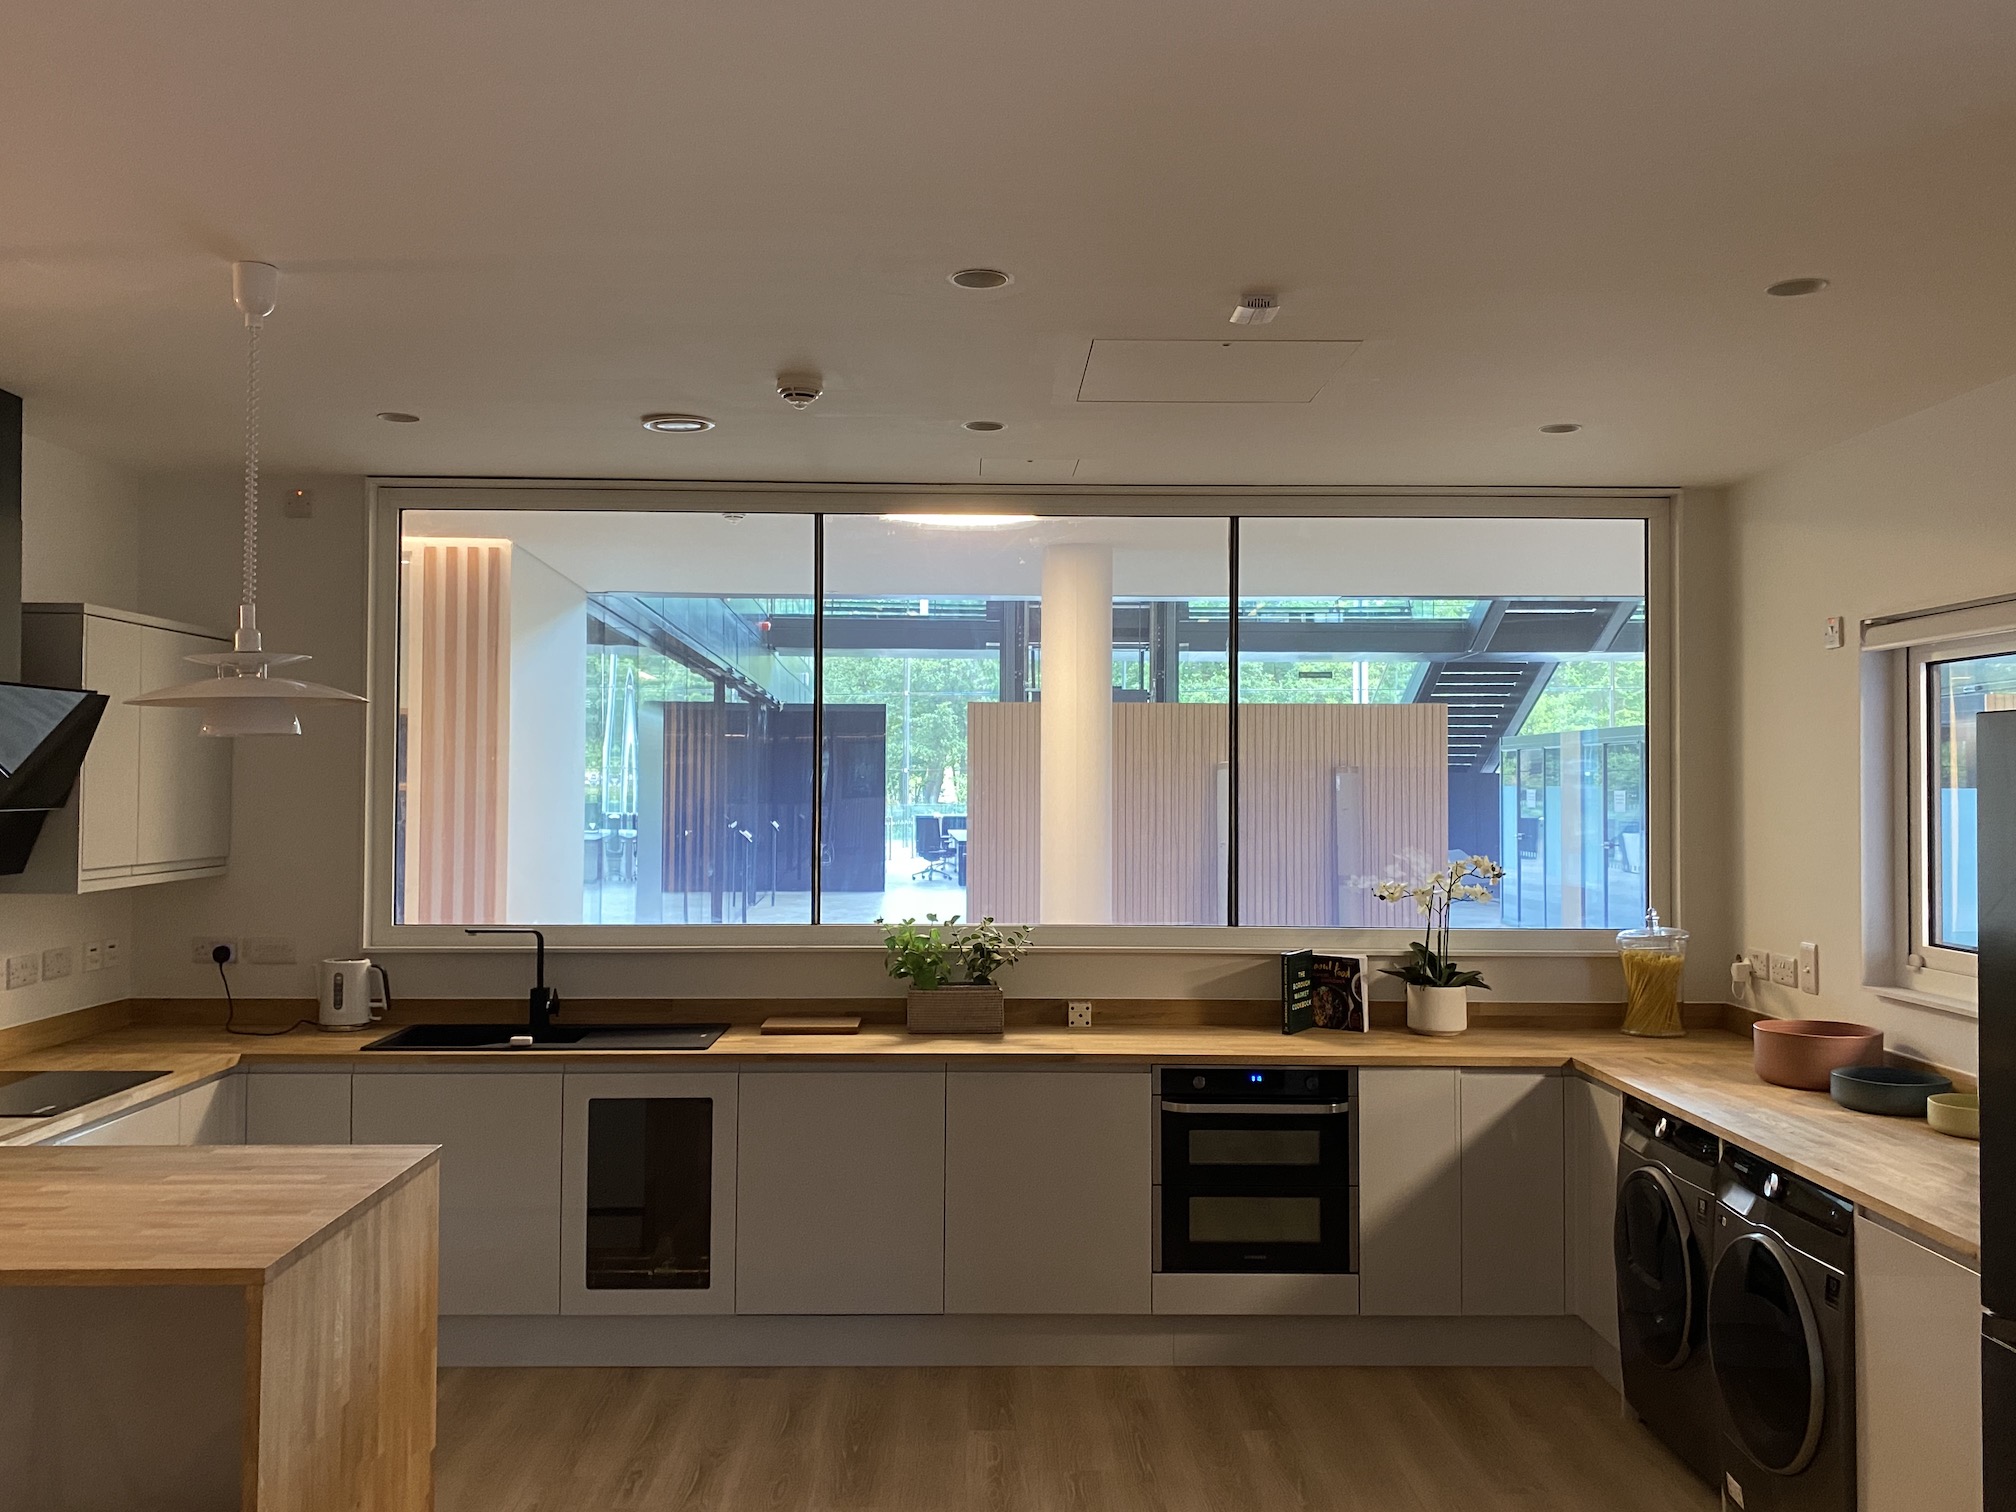 Privacy Glass panels deliver privacy at the flick of a switch while still allowing light to move through a property.